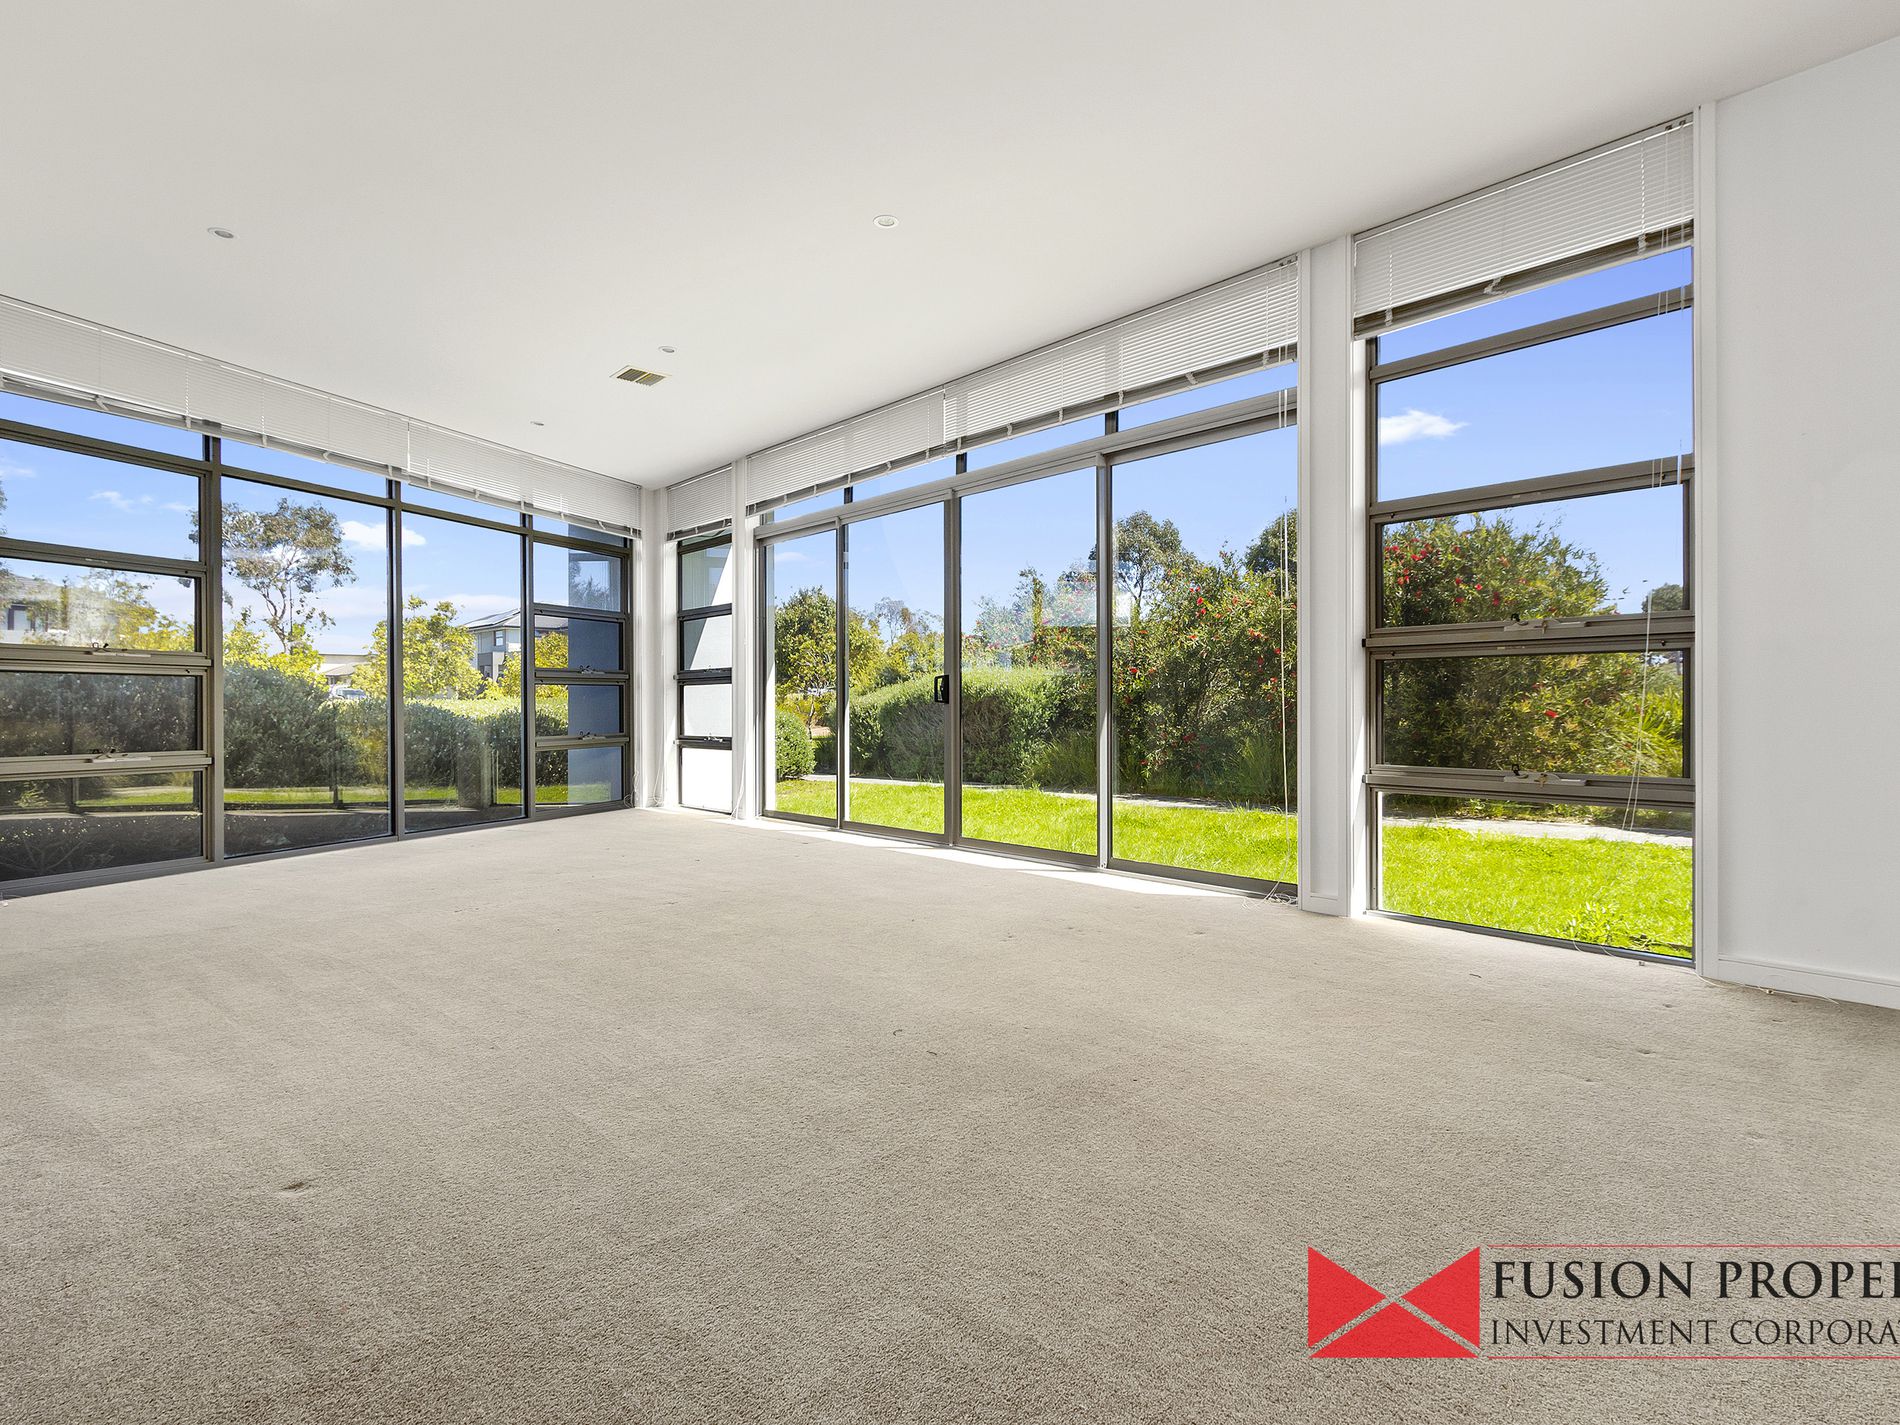 6 PICKING COURT, Wantirna South